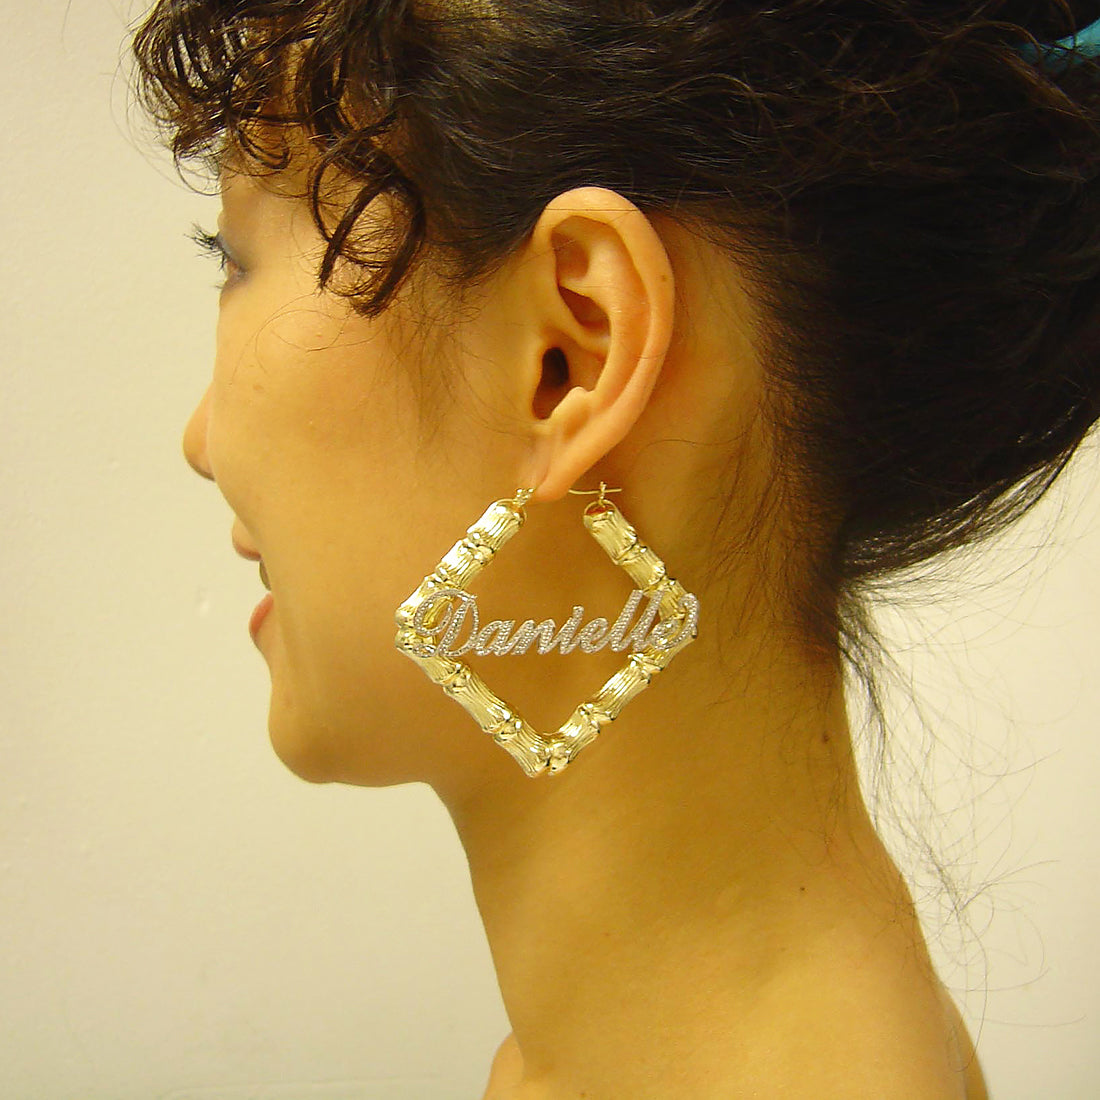 Personalized 10k Real Gold Square Door Knocker Iced Out Name Bamboo Earrings 2.5 Inches Wide